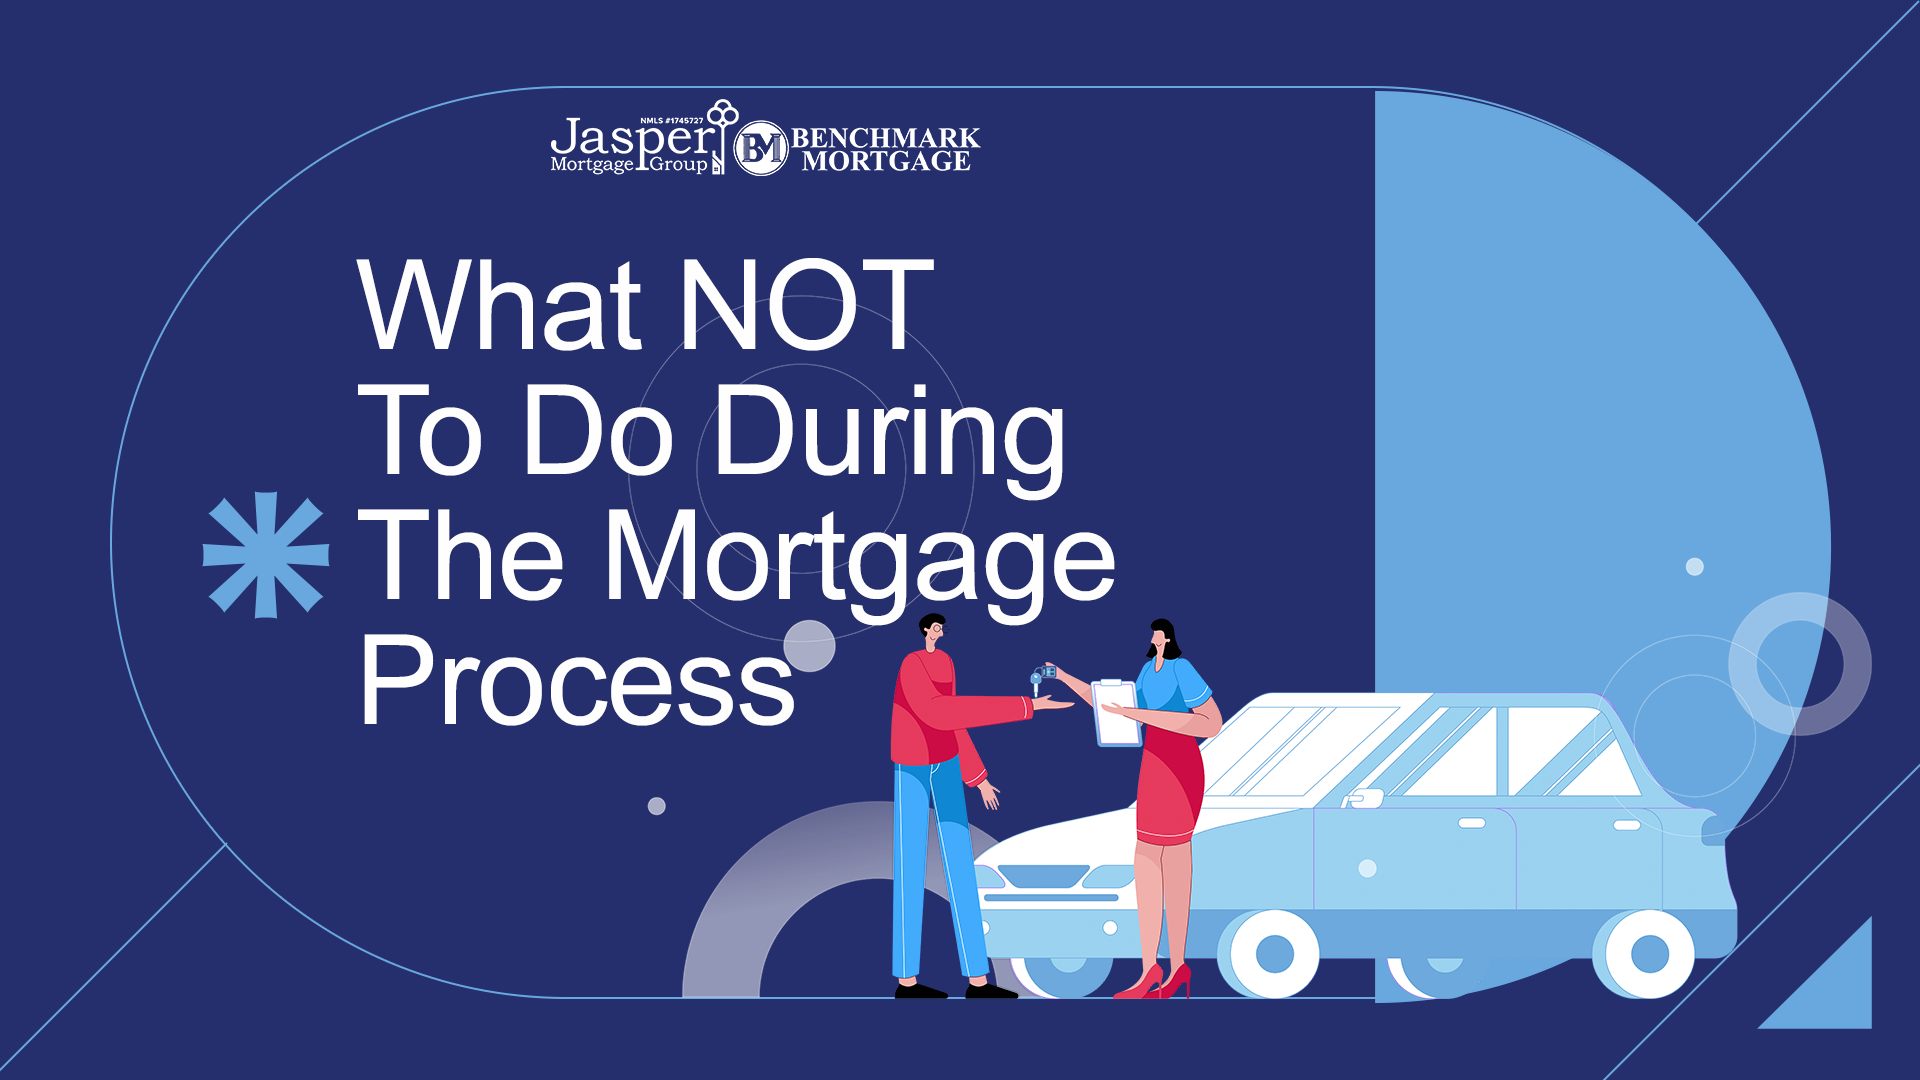 What Not To Do During The Mortgage Process